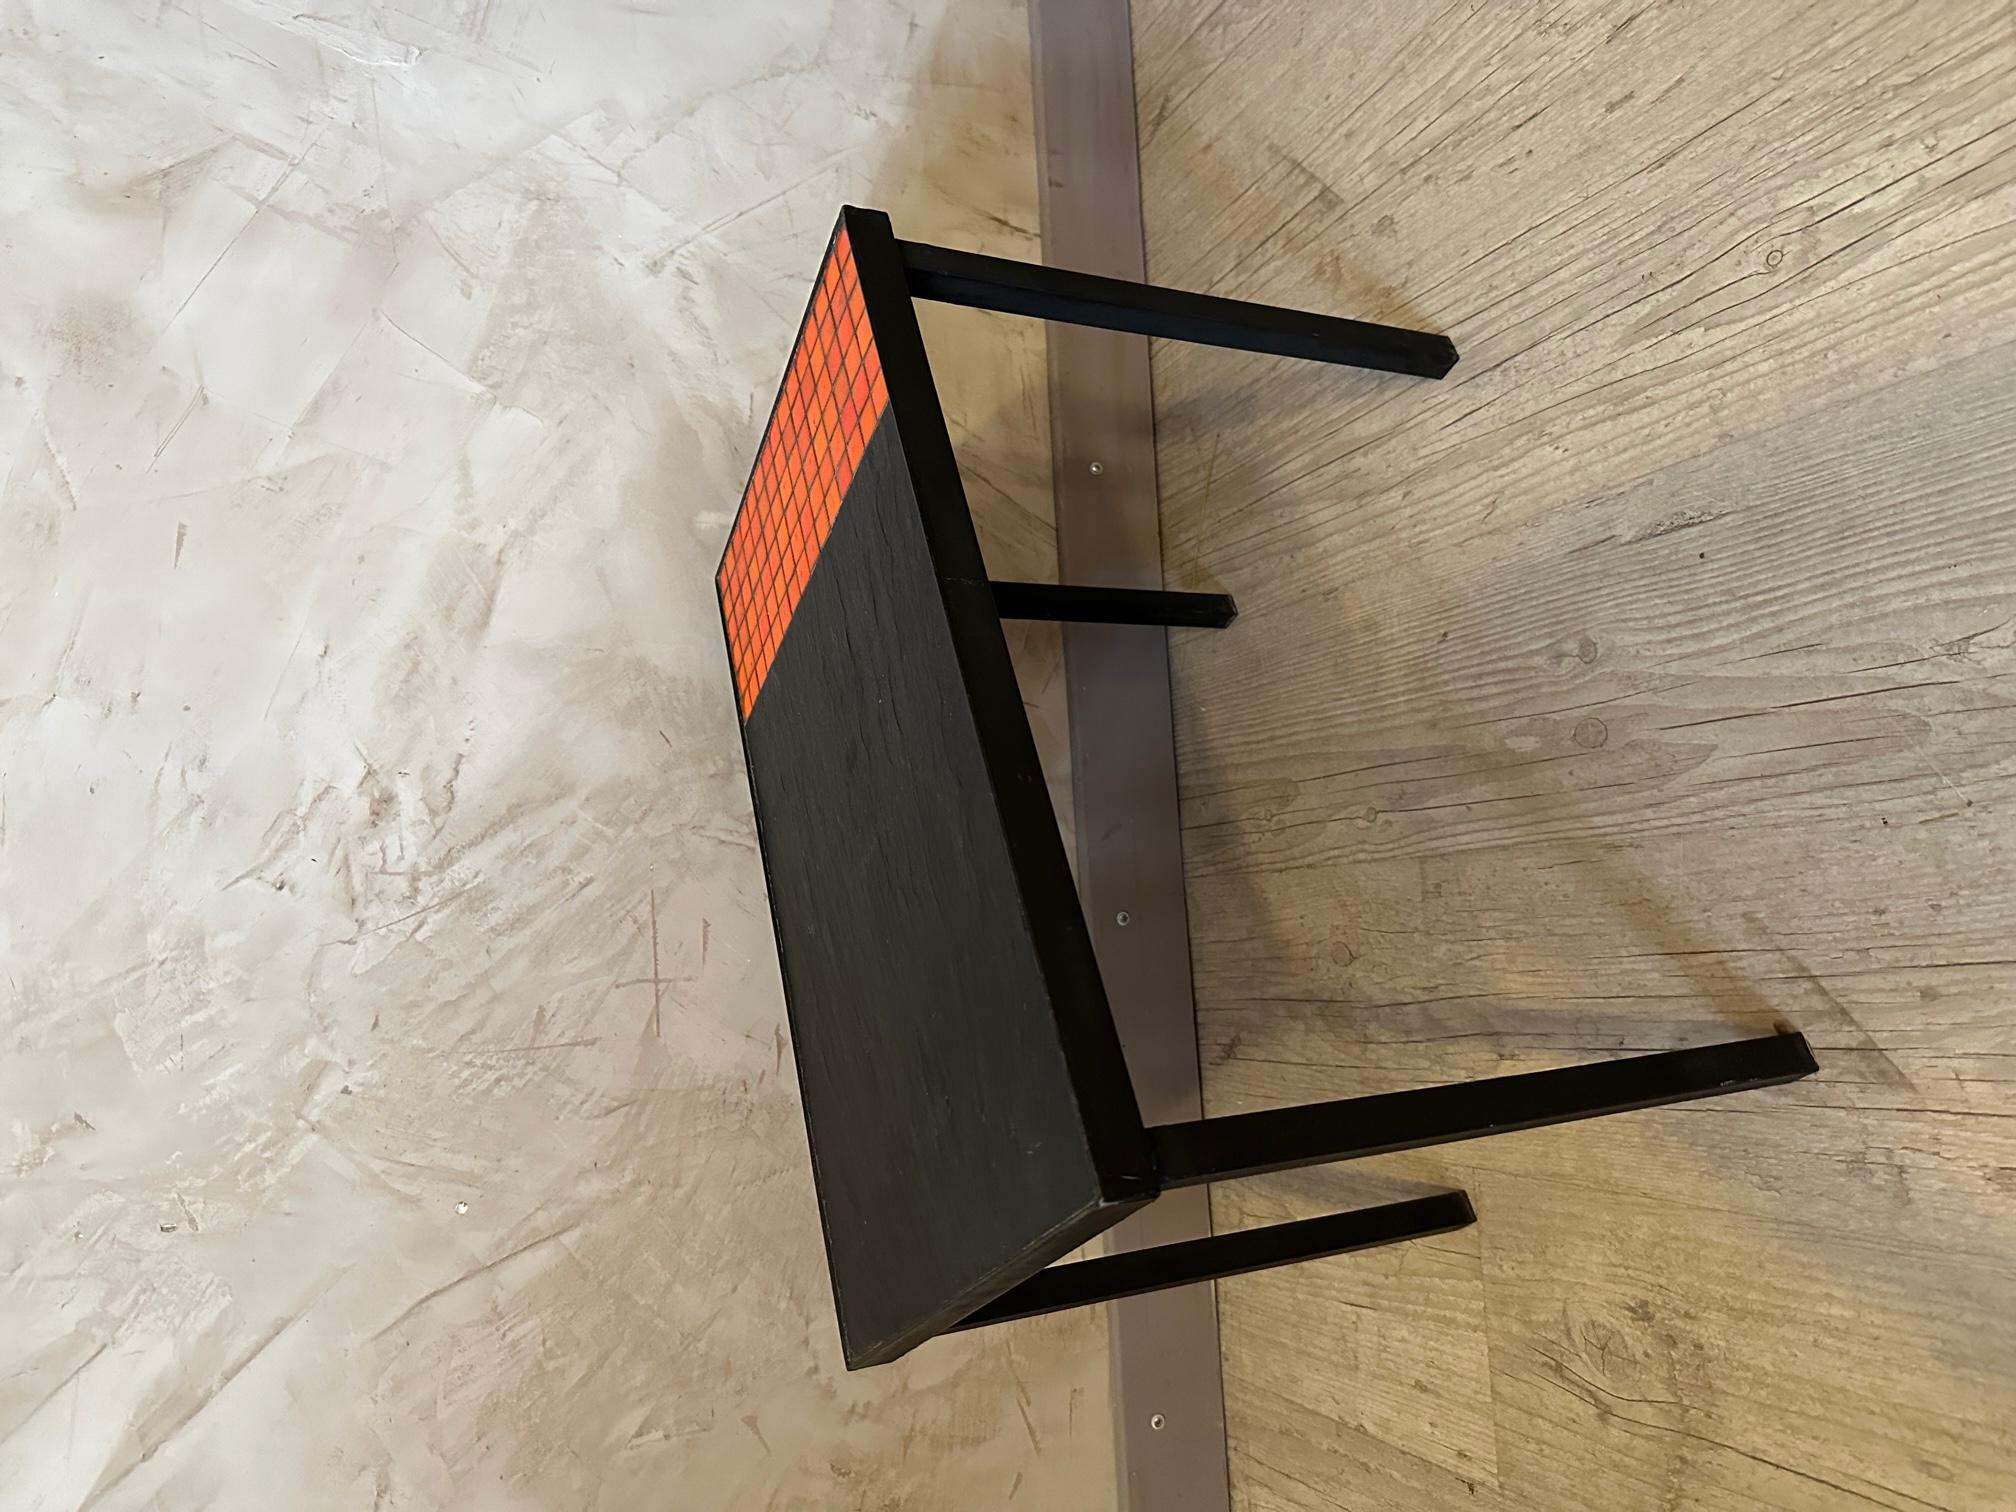 Small vintage side table from the 60s in the style of Roger Capron. 
Black metal base and half orange ceramic tile top and black stone effect tile.
Ideal as a bedside table or side table near a sofa. 
Good condition and good quality.